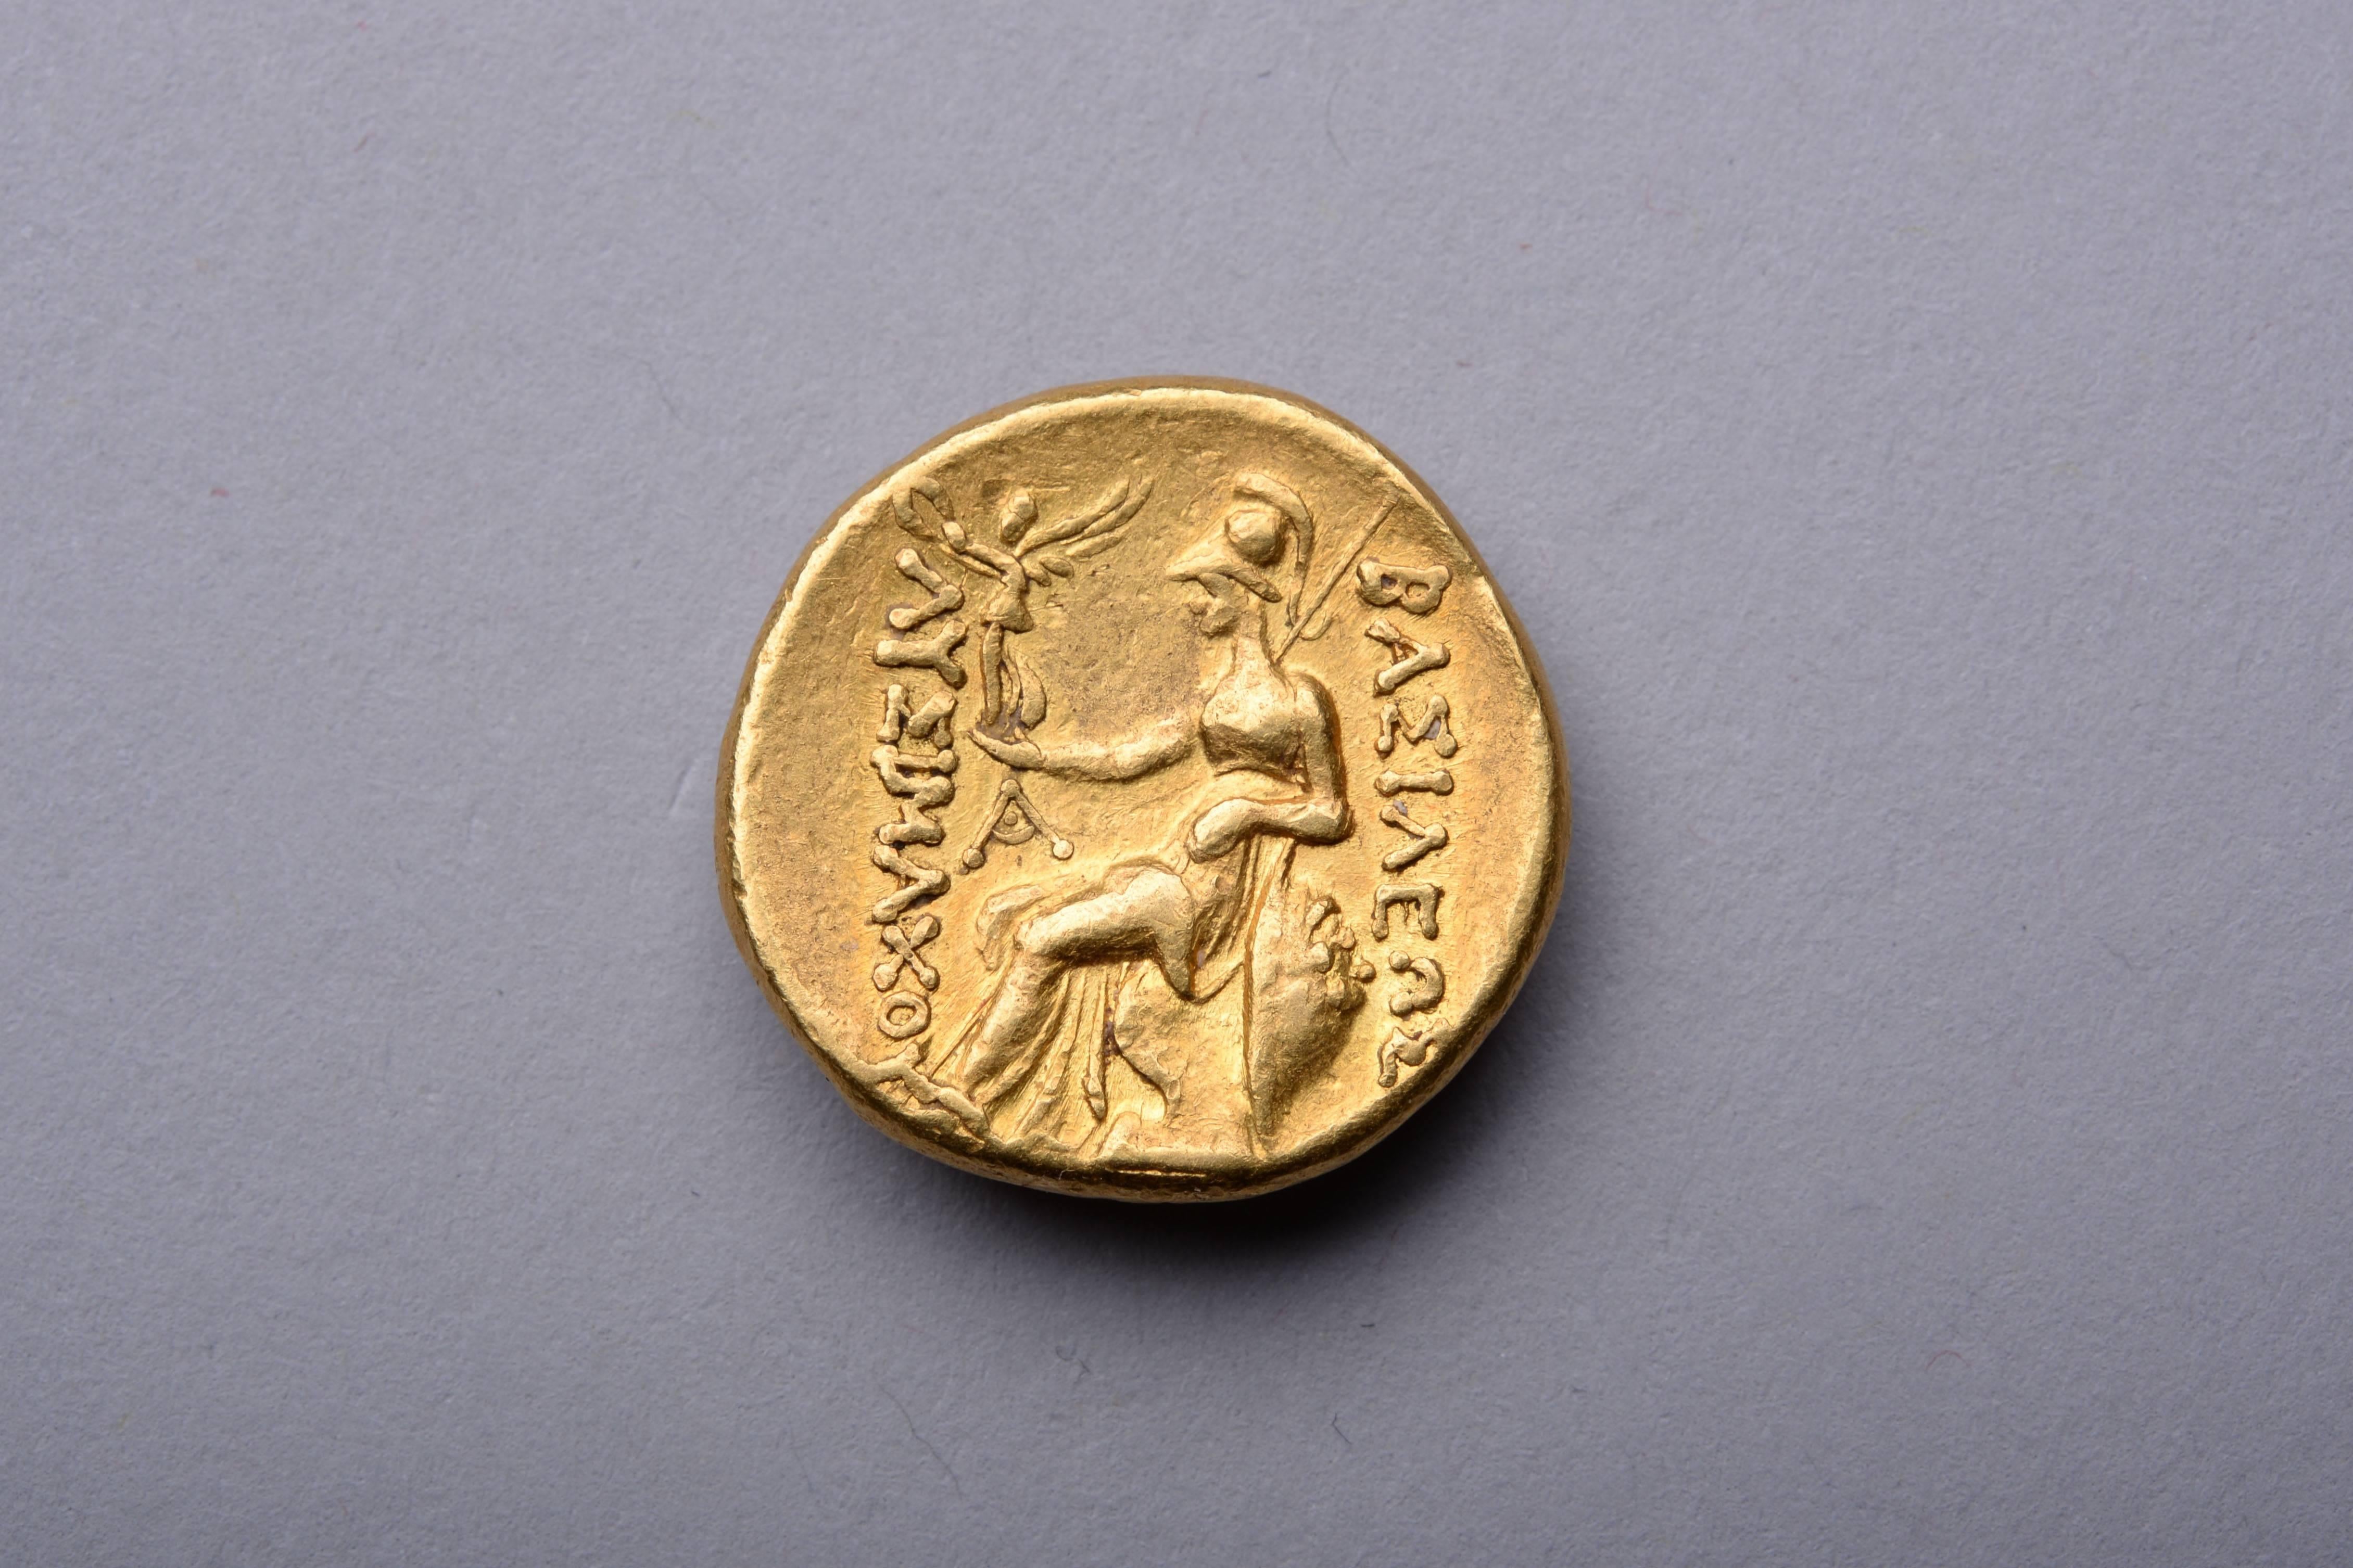 A pleasing example of a historically fascinating coin type. This gold stater, minted under King Lysimachos, depicts one of the earliest known portraits of Alexander the Great, in fine Hellenistic style. Struck in Thrace, circa 281 BC.

The obverse